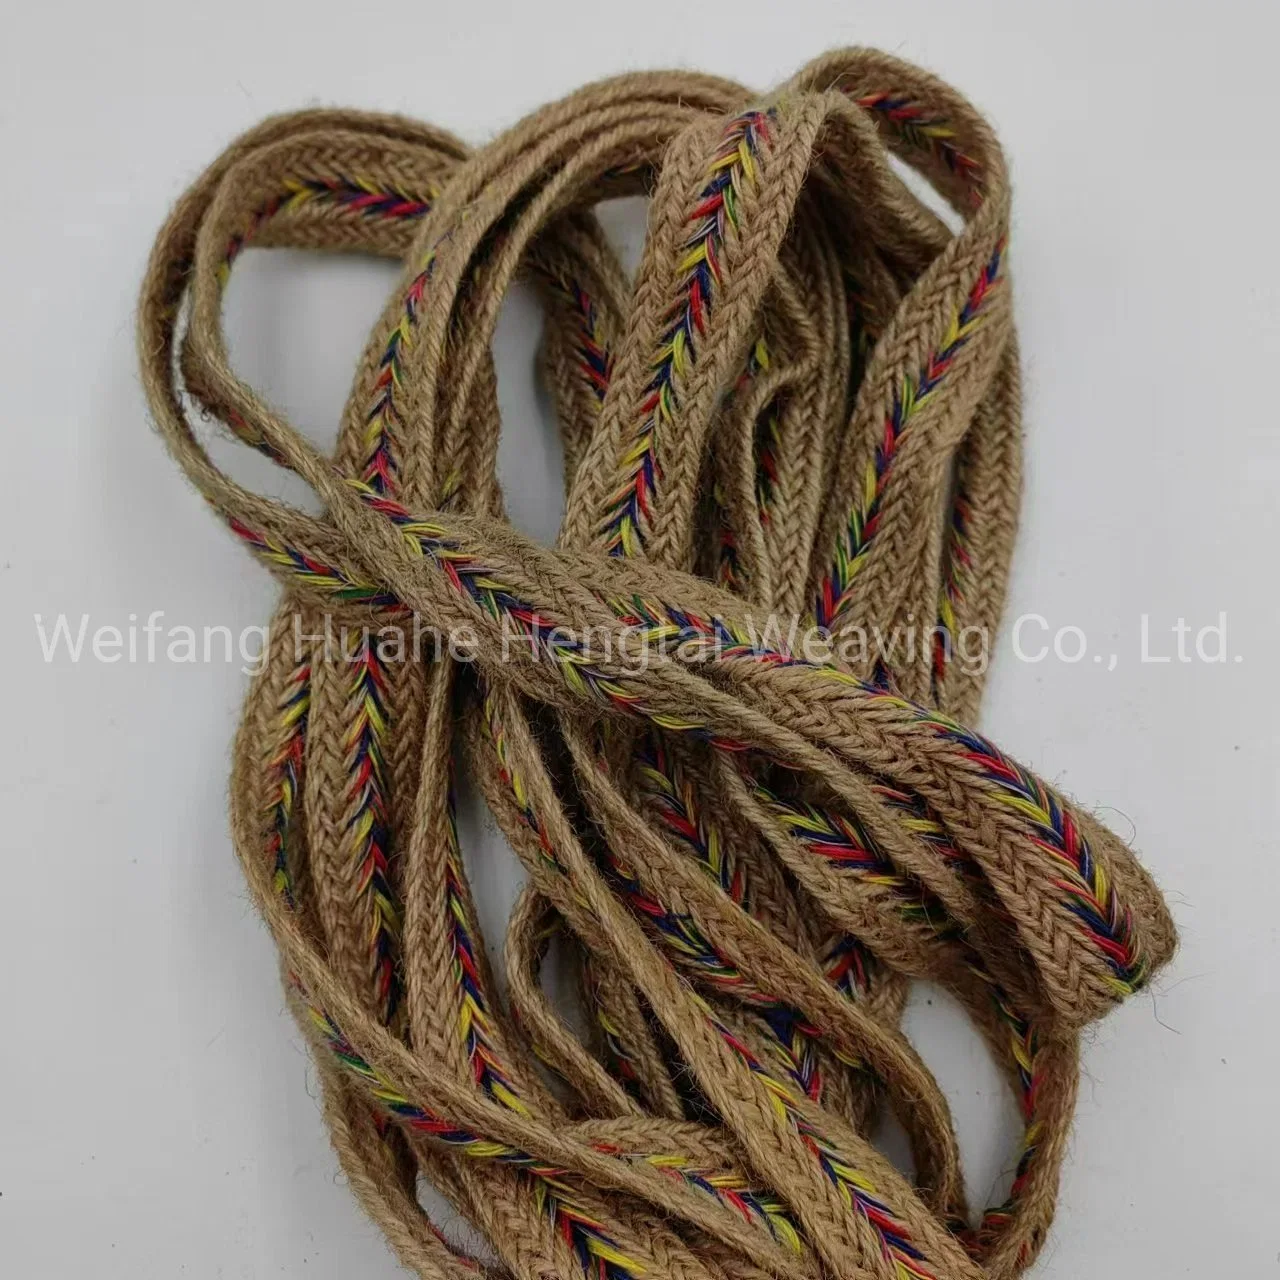 Ethnic Style Patterned Flat Cord Woven Ribbon